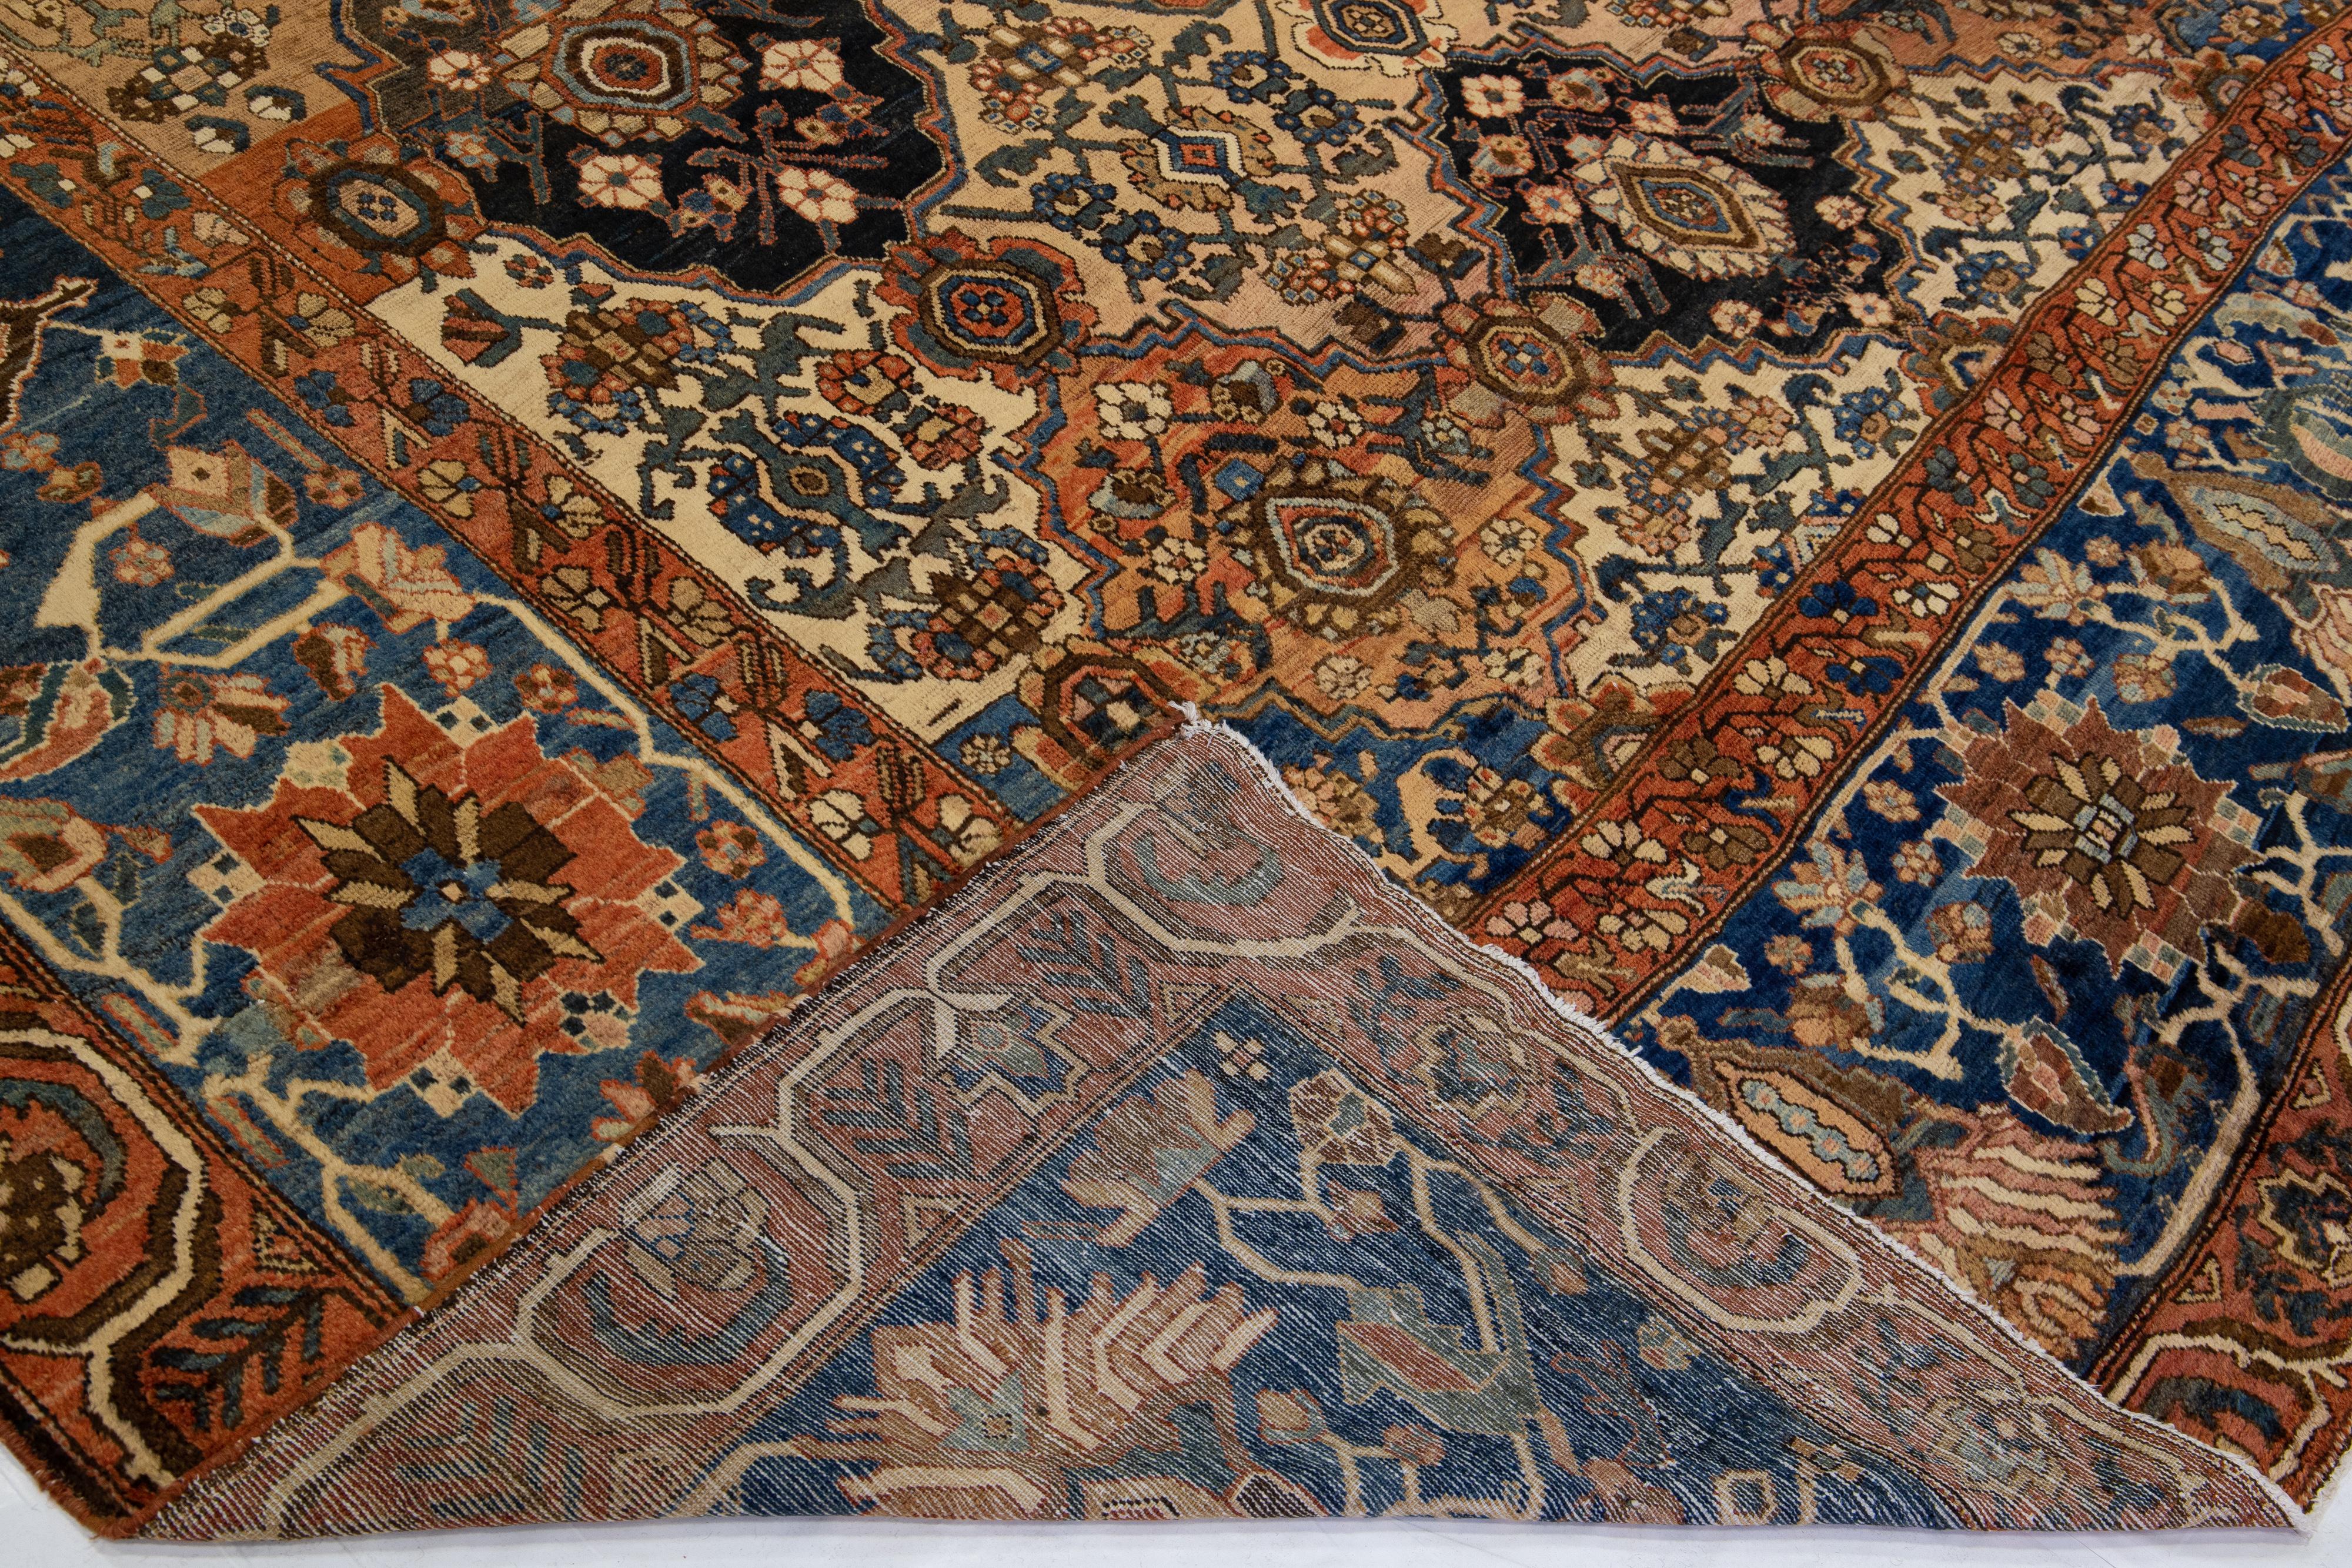 Beautiful antique Bakhtiari hand-knotted wool rug with a brown field. This piece has a blue frame with multicolor accent colors in a gorgeous all-over classic geometric design.

This rug measures 12'7